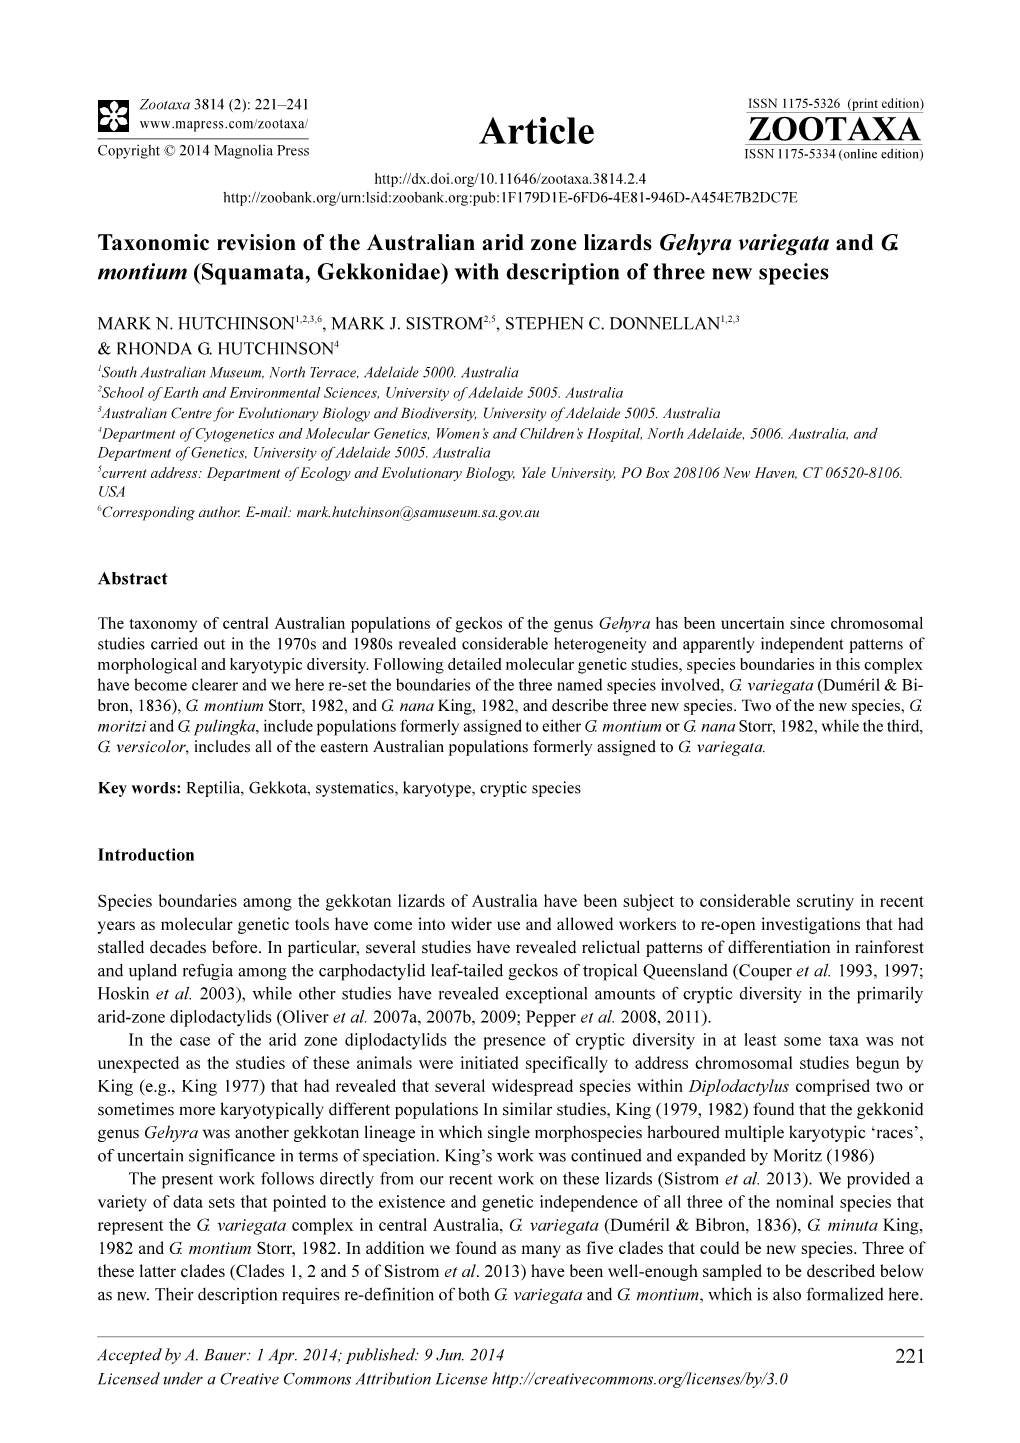 Taxonomic Revision of the Australian Arid Zone Lizards Gehyra Variegata and G